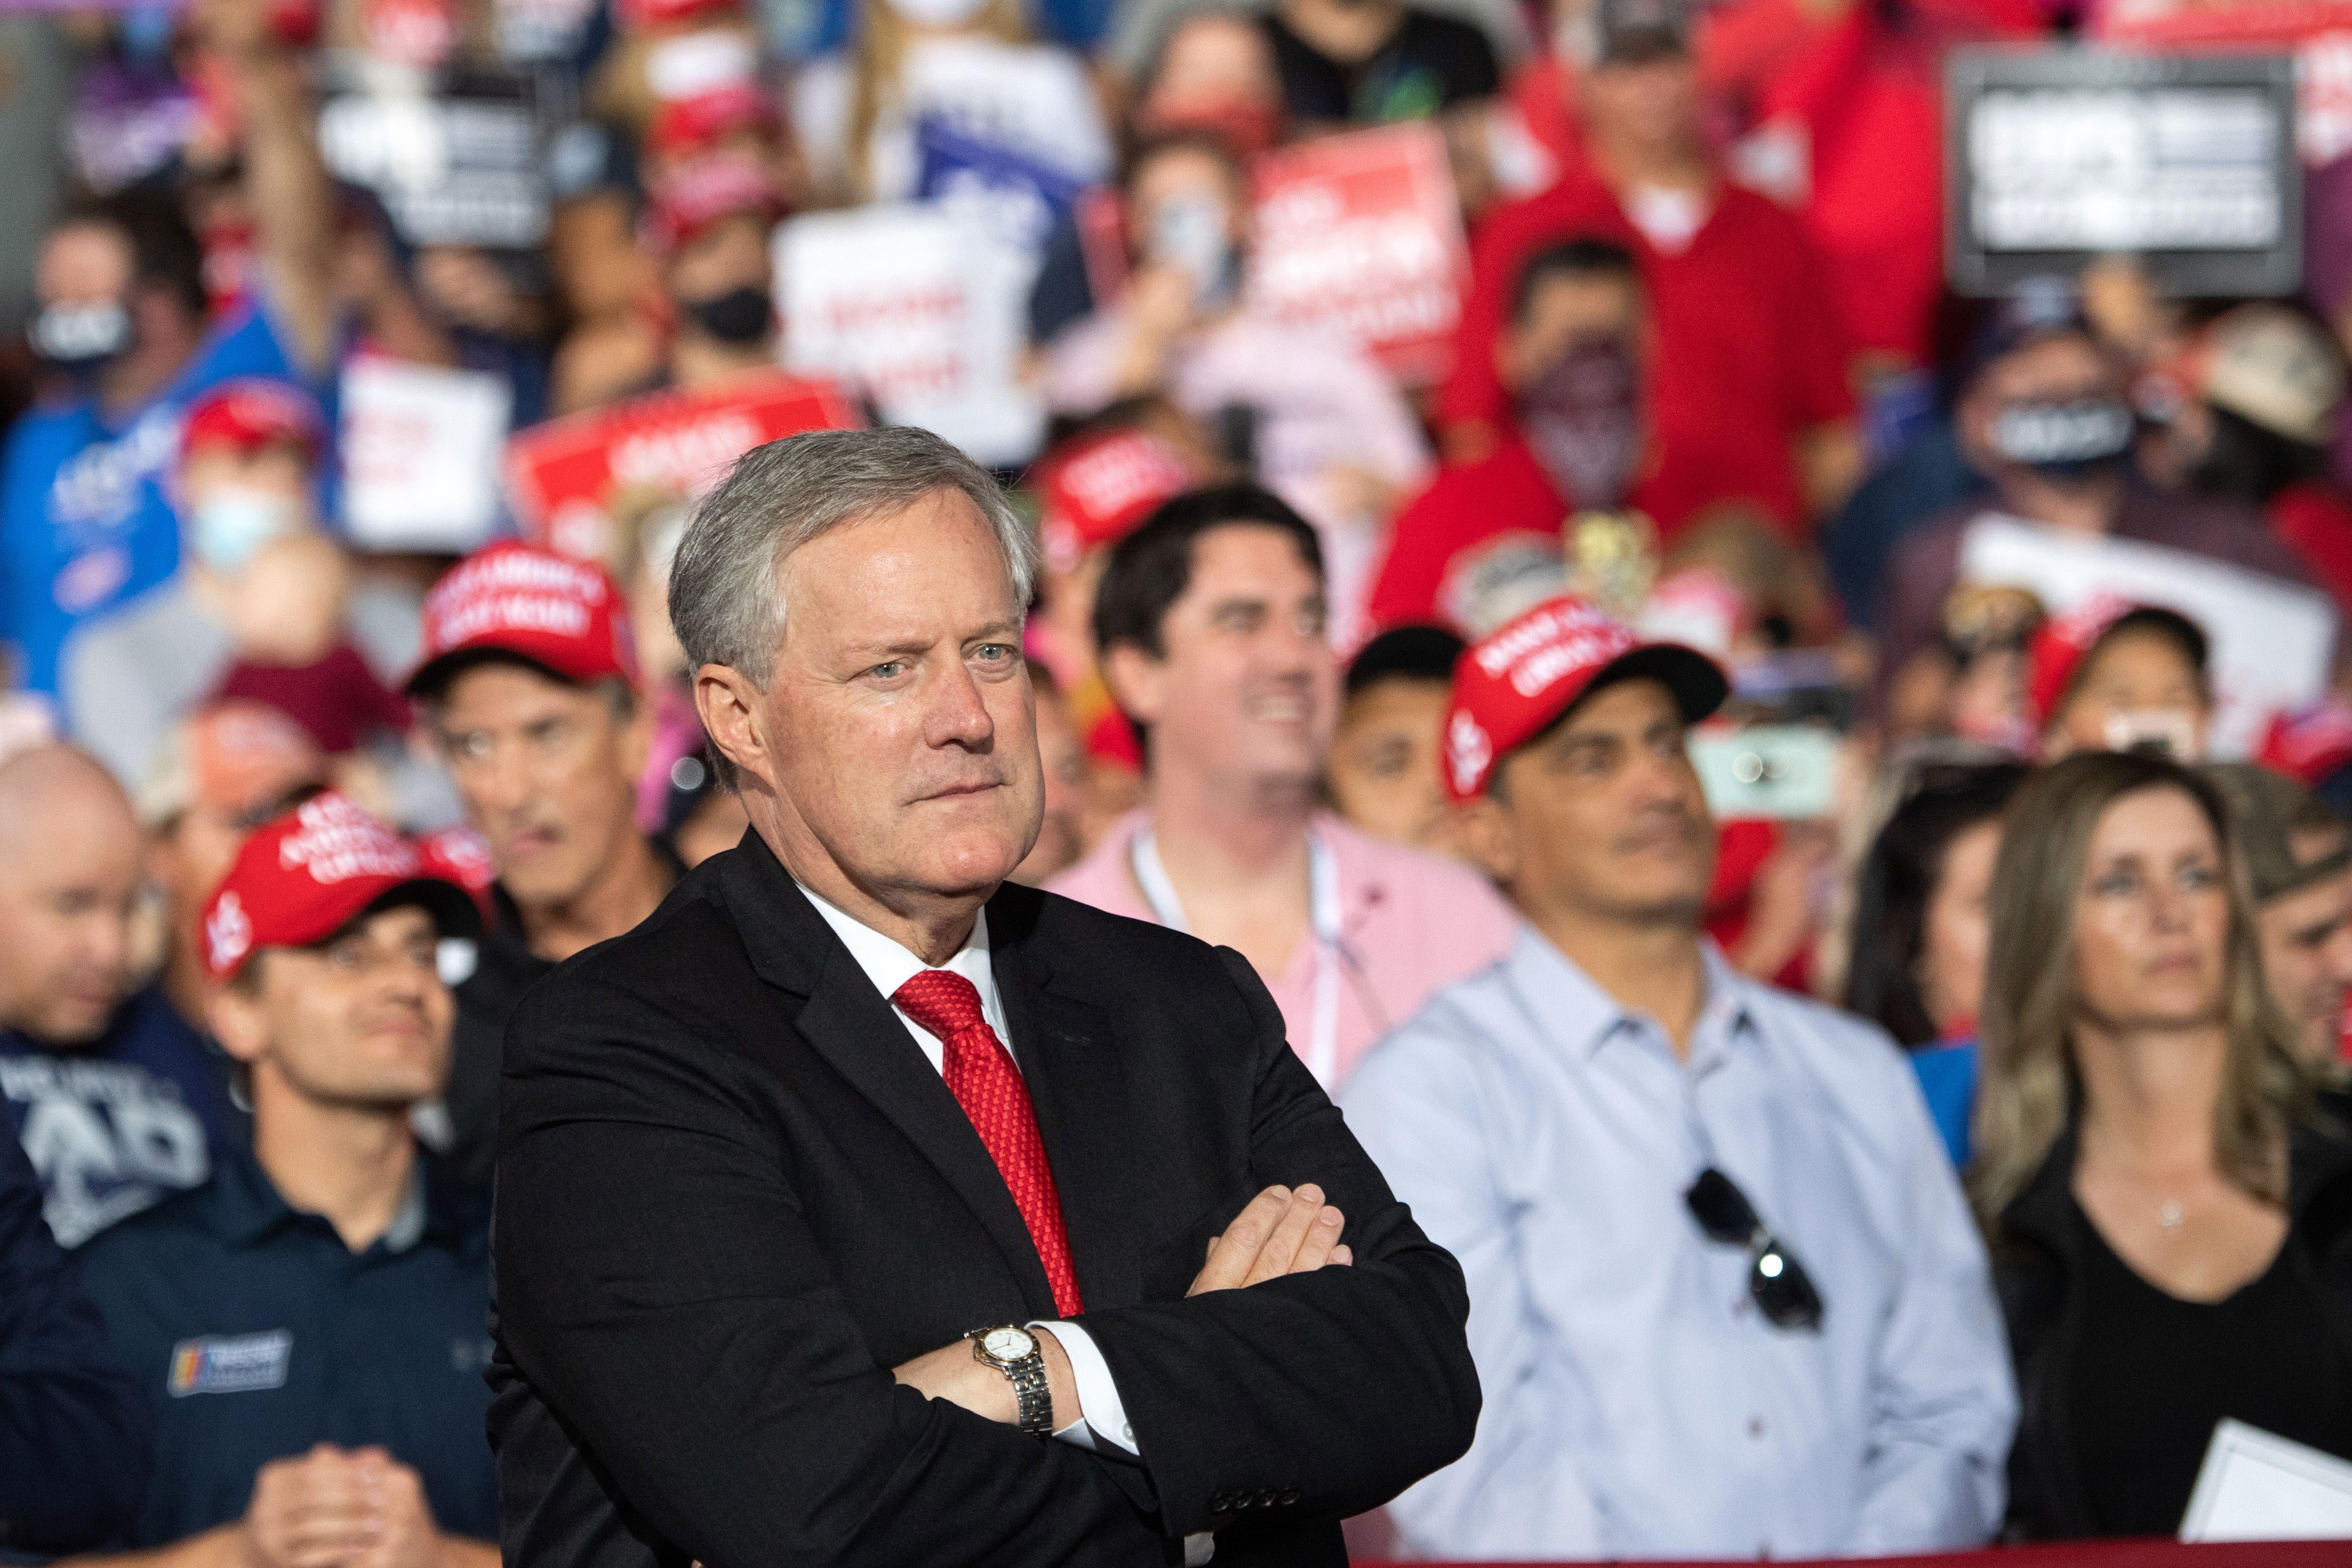 Then-White House Chief of Staff Mark Meadows listens as Donald Trump holds a rally as he campaigns in Gastonia, North Carolina, October 21, 2020. 